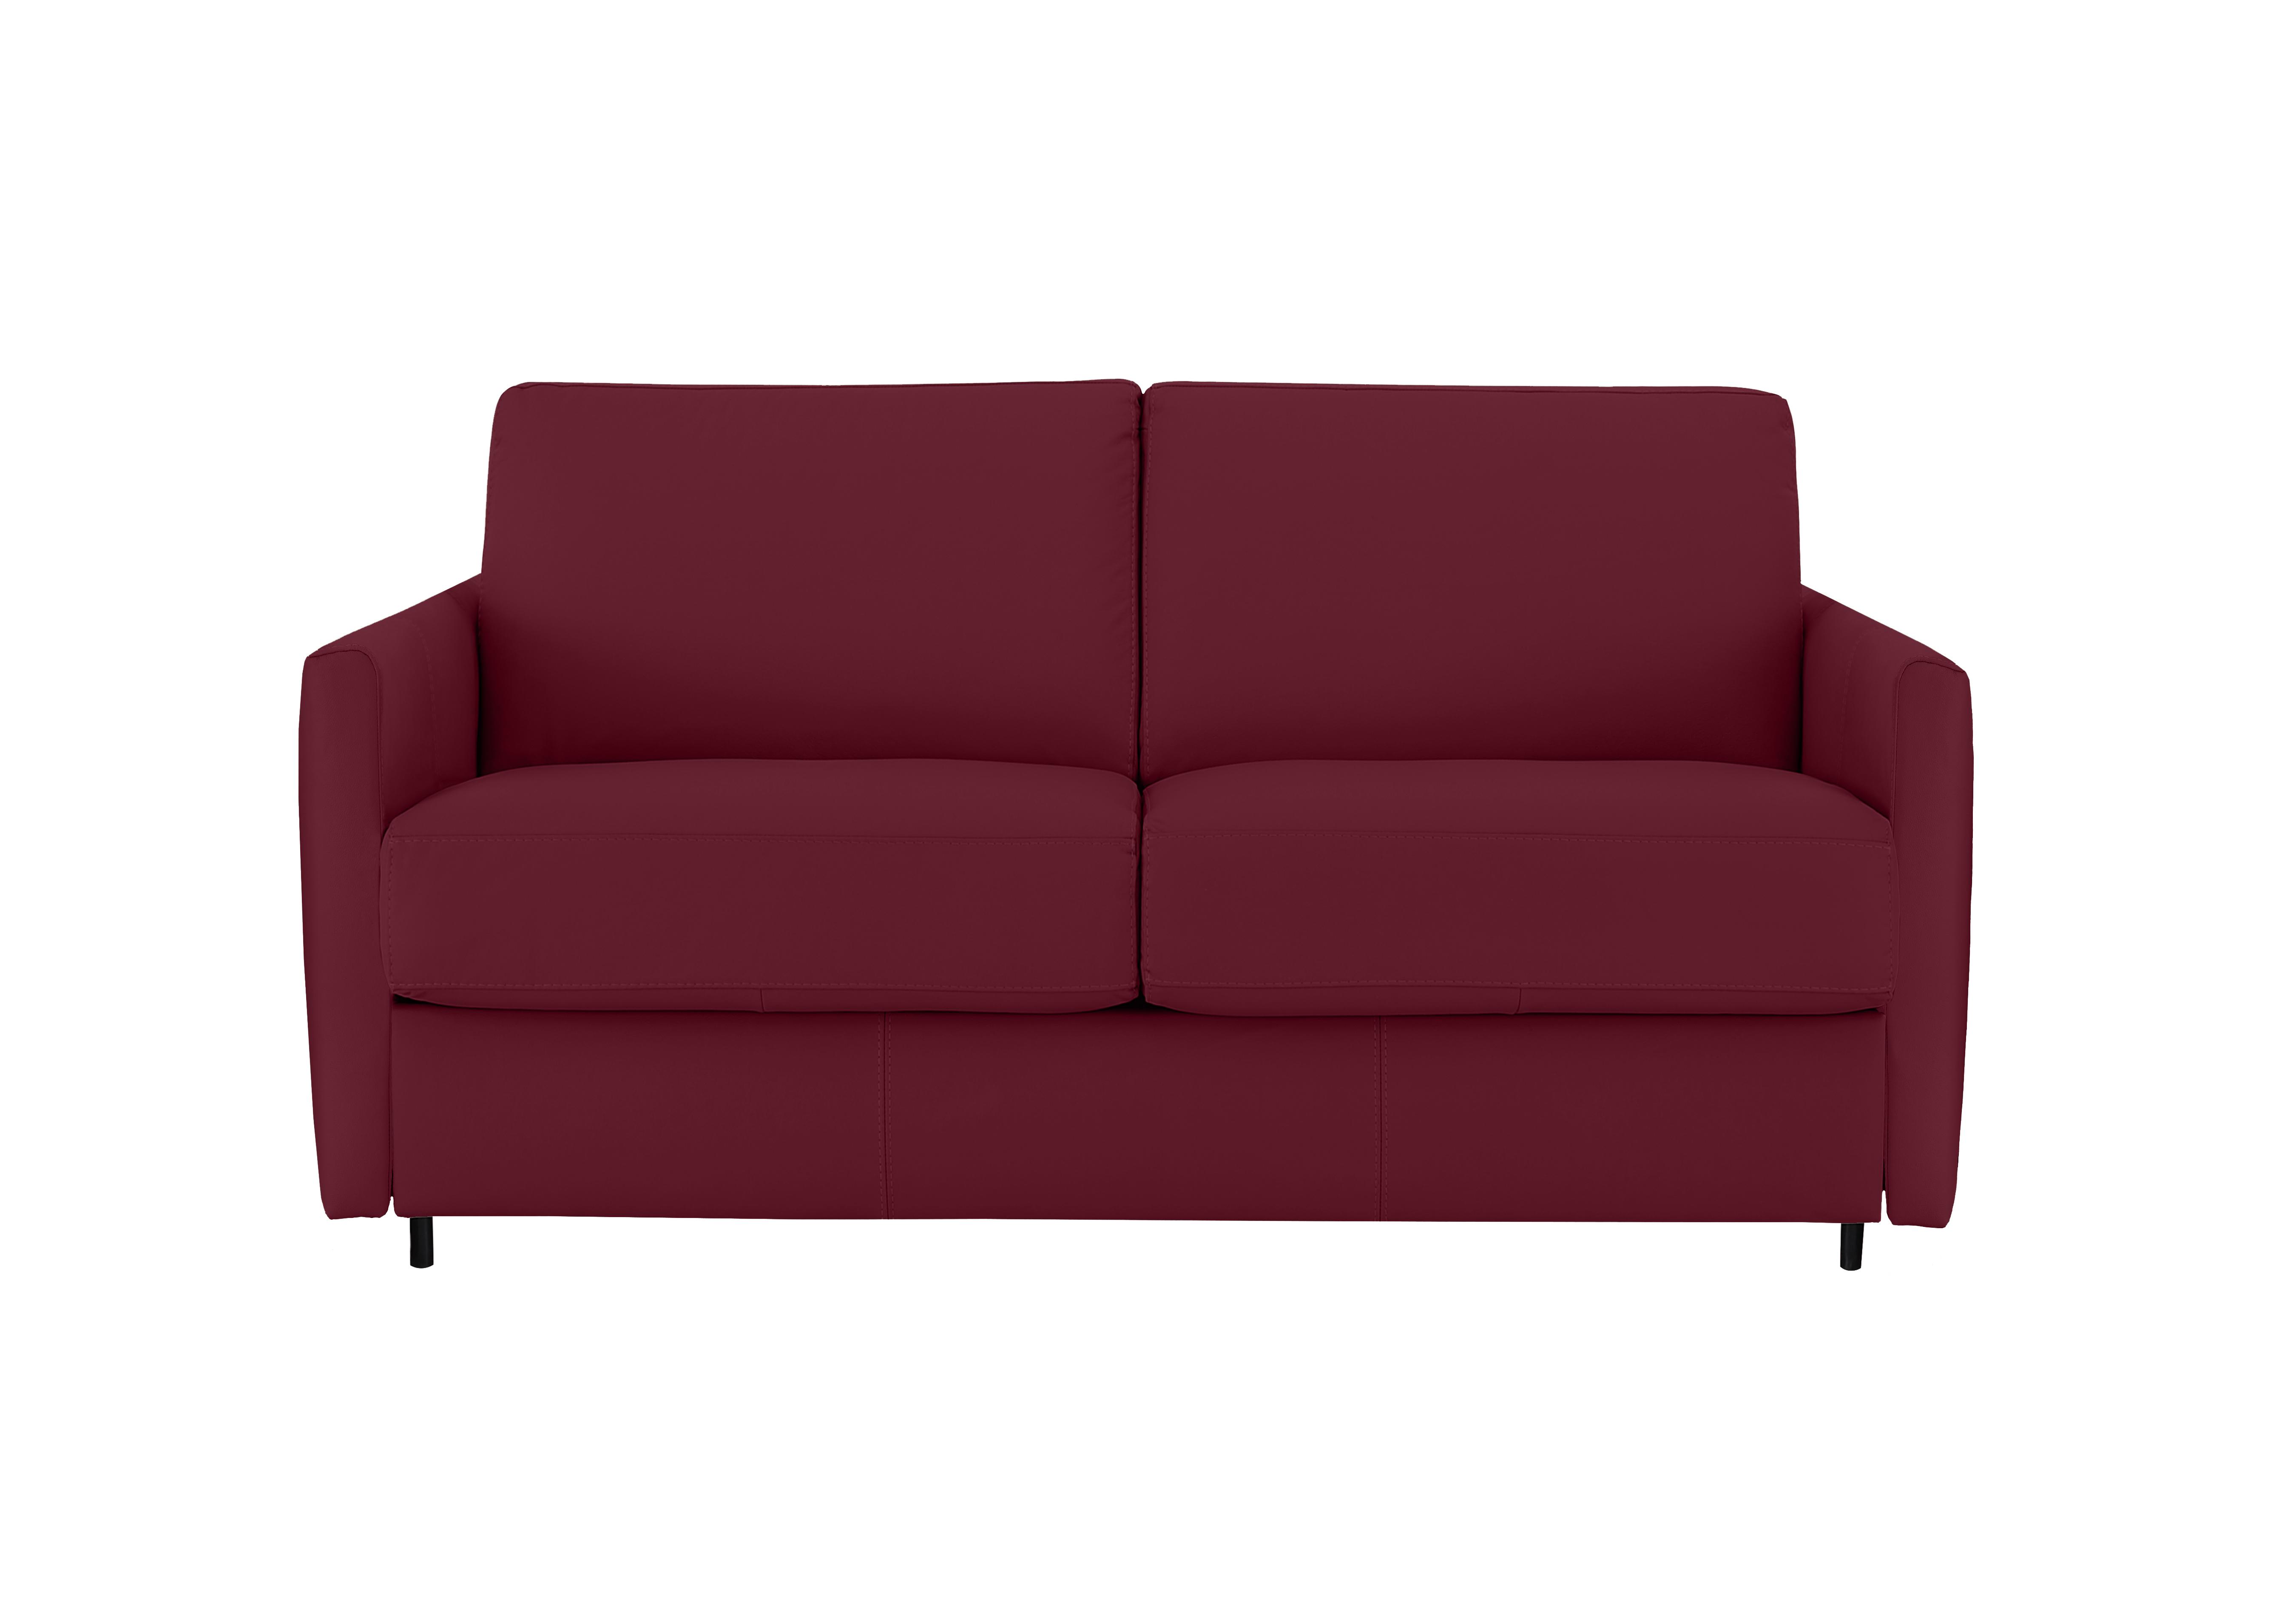 Alcova 2 Seater Leather Sofa Bed with Slim Arms in Dali Bordeaux 1521 on Furniture Village